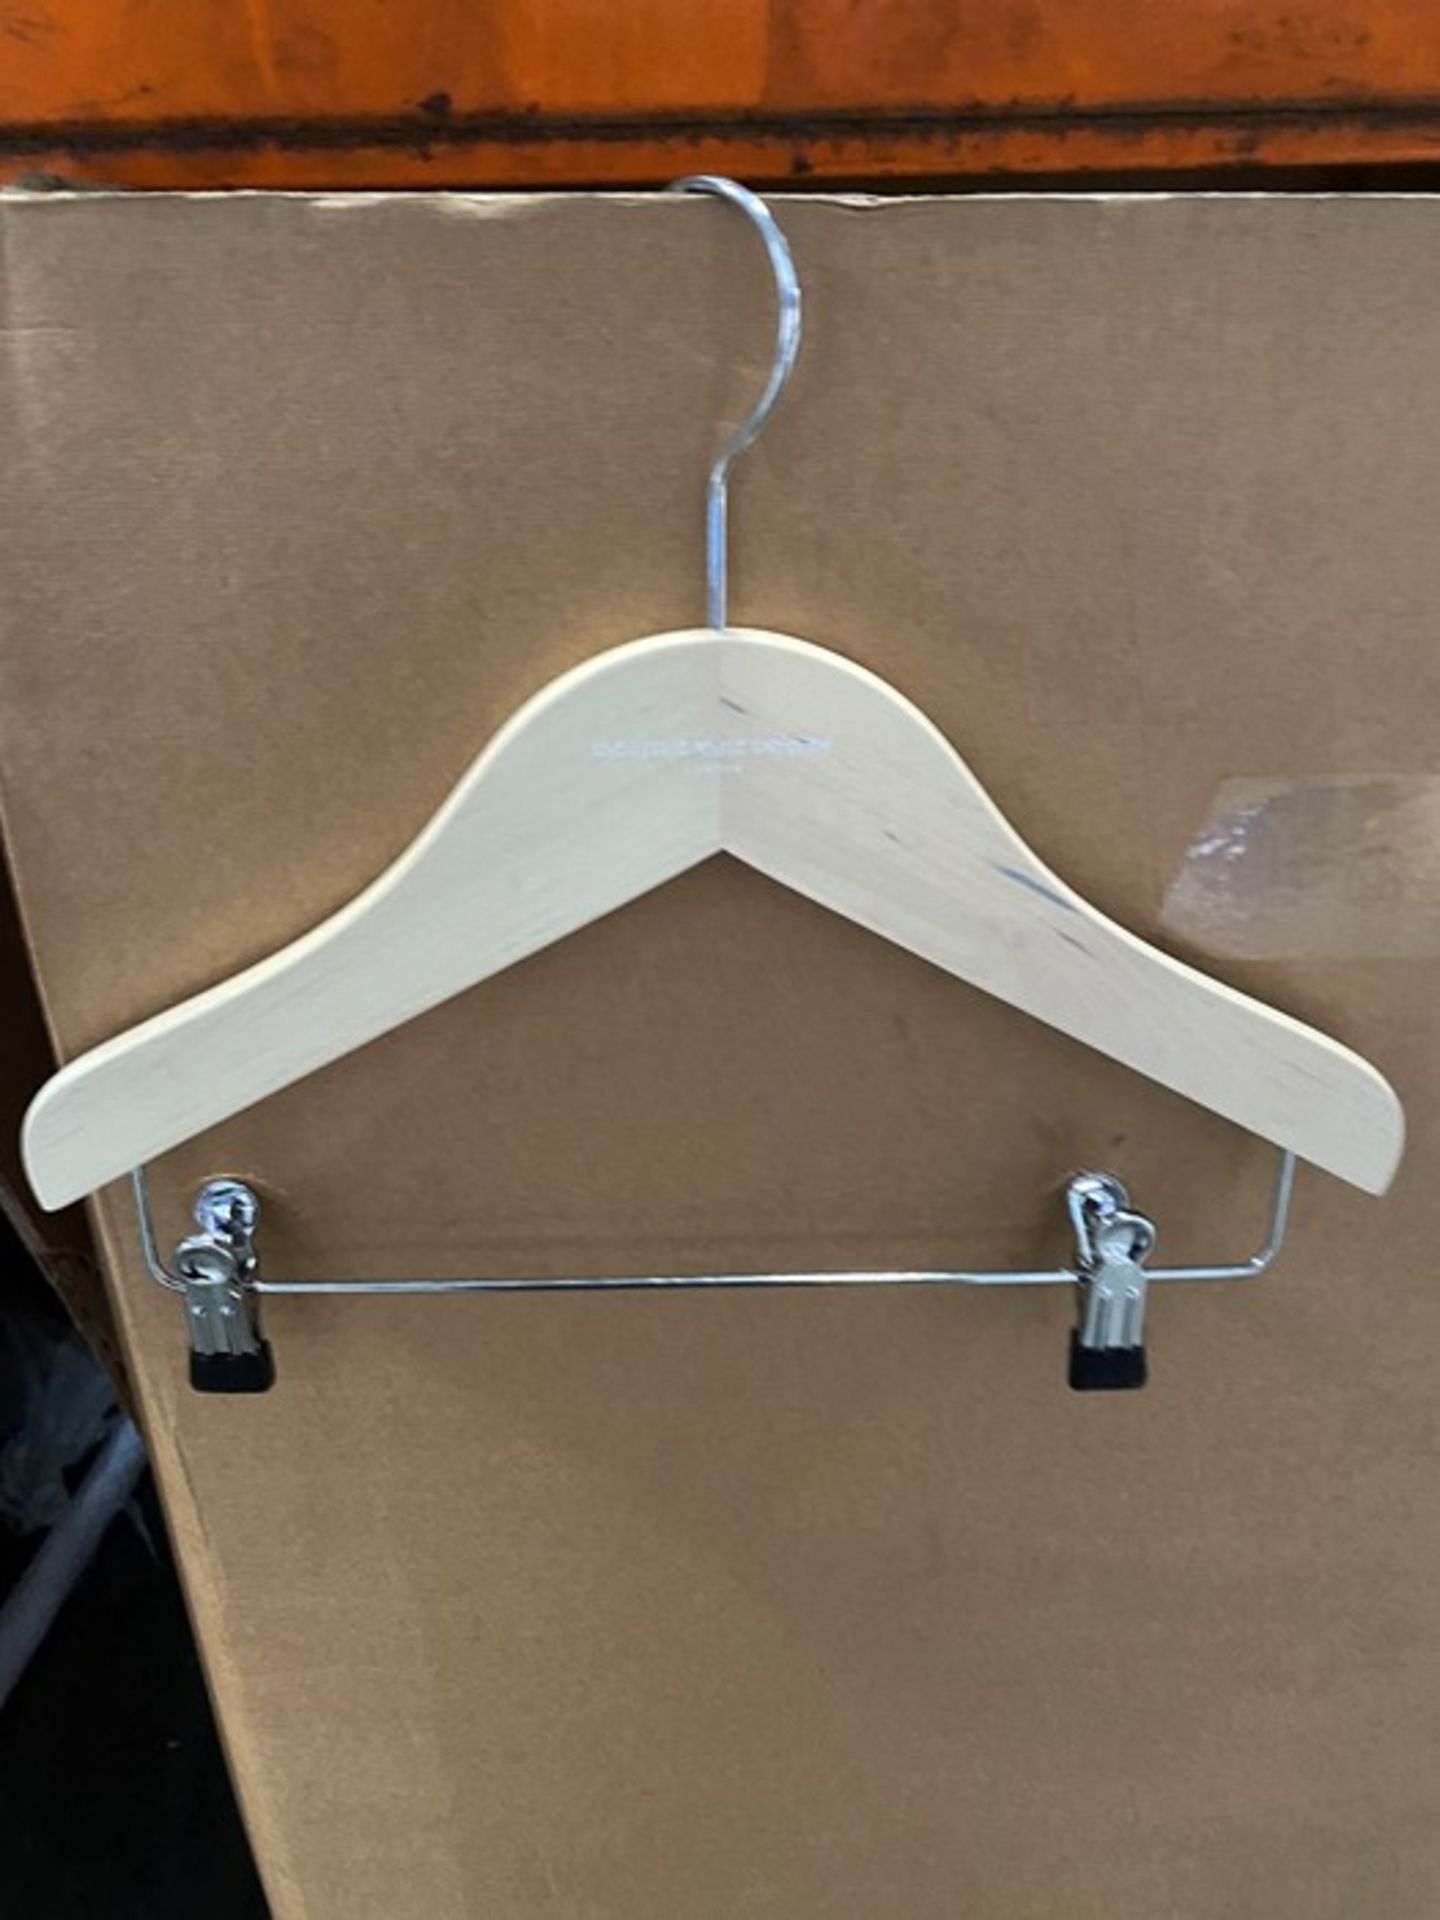 1 SMALL BOX FULL OF WOODEN COAT HANGERS BOXED